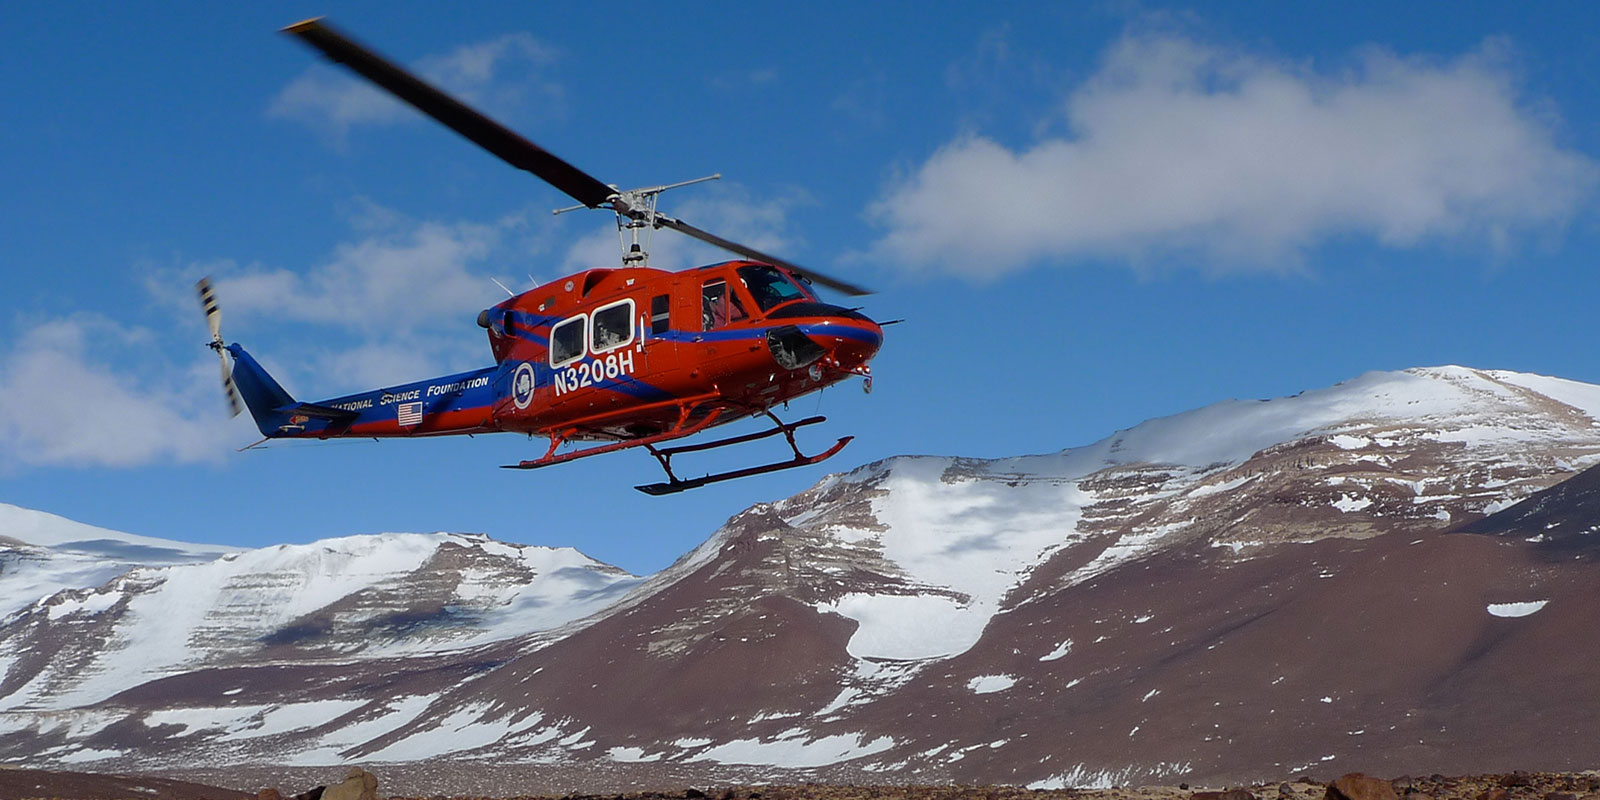 A helicopter takes off with the barren Antarctic skyline in the background